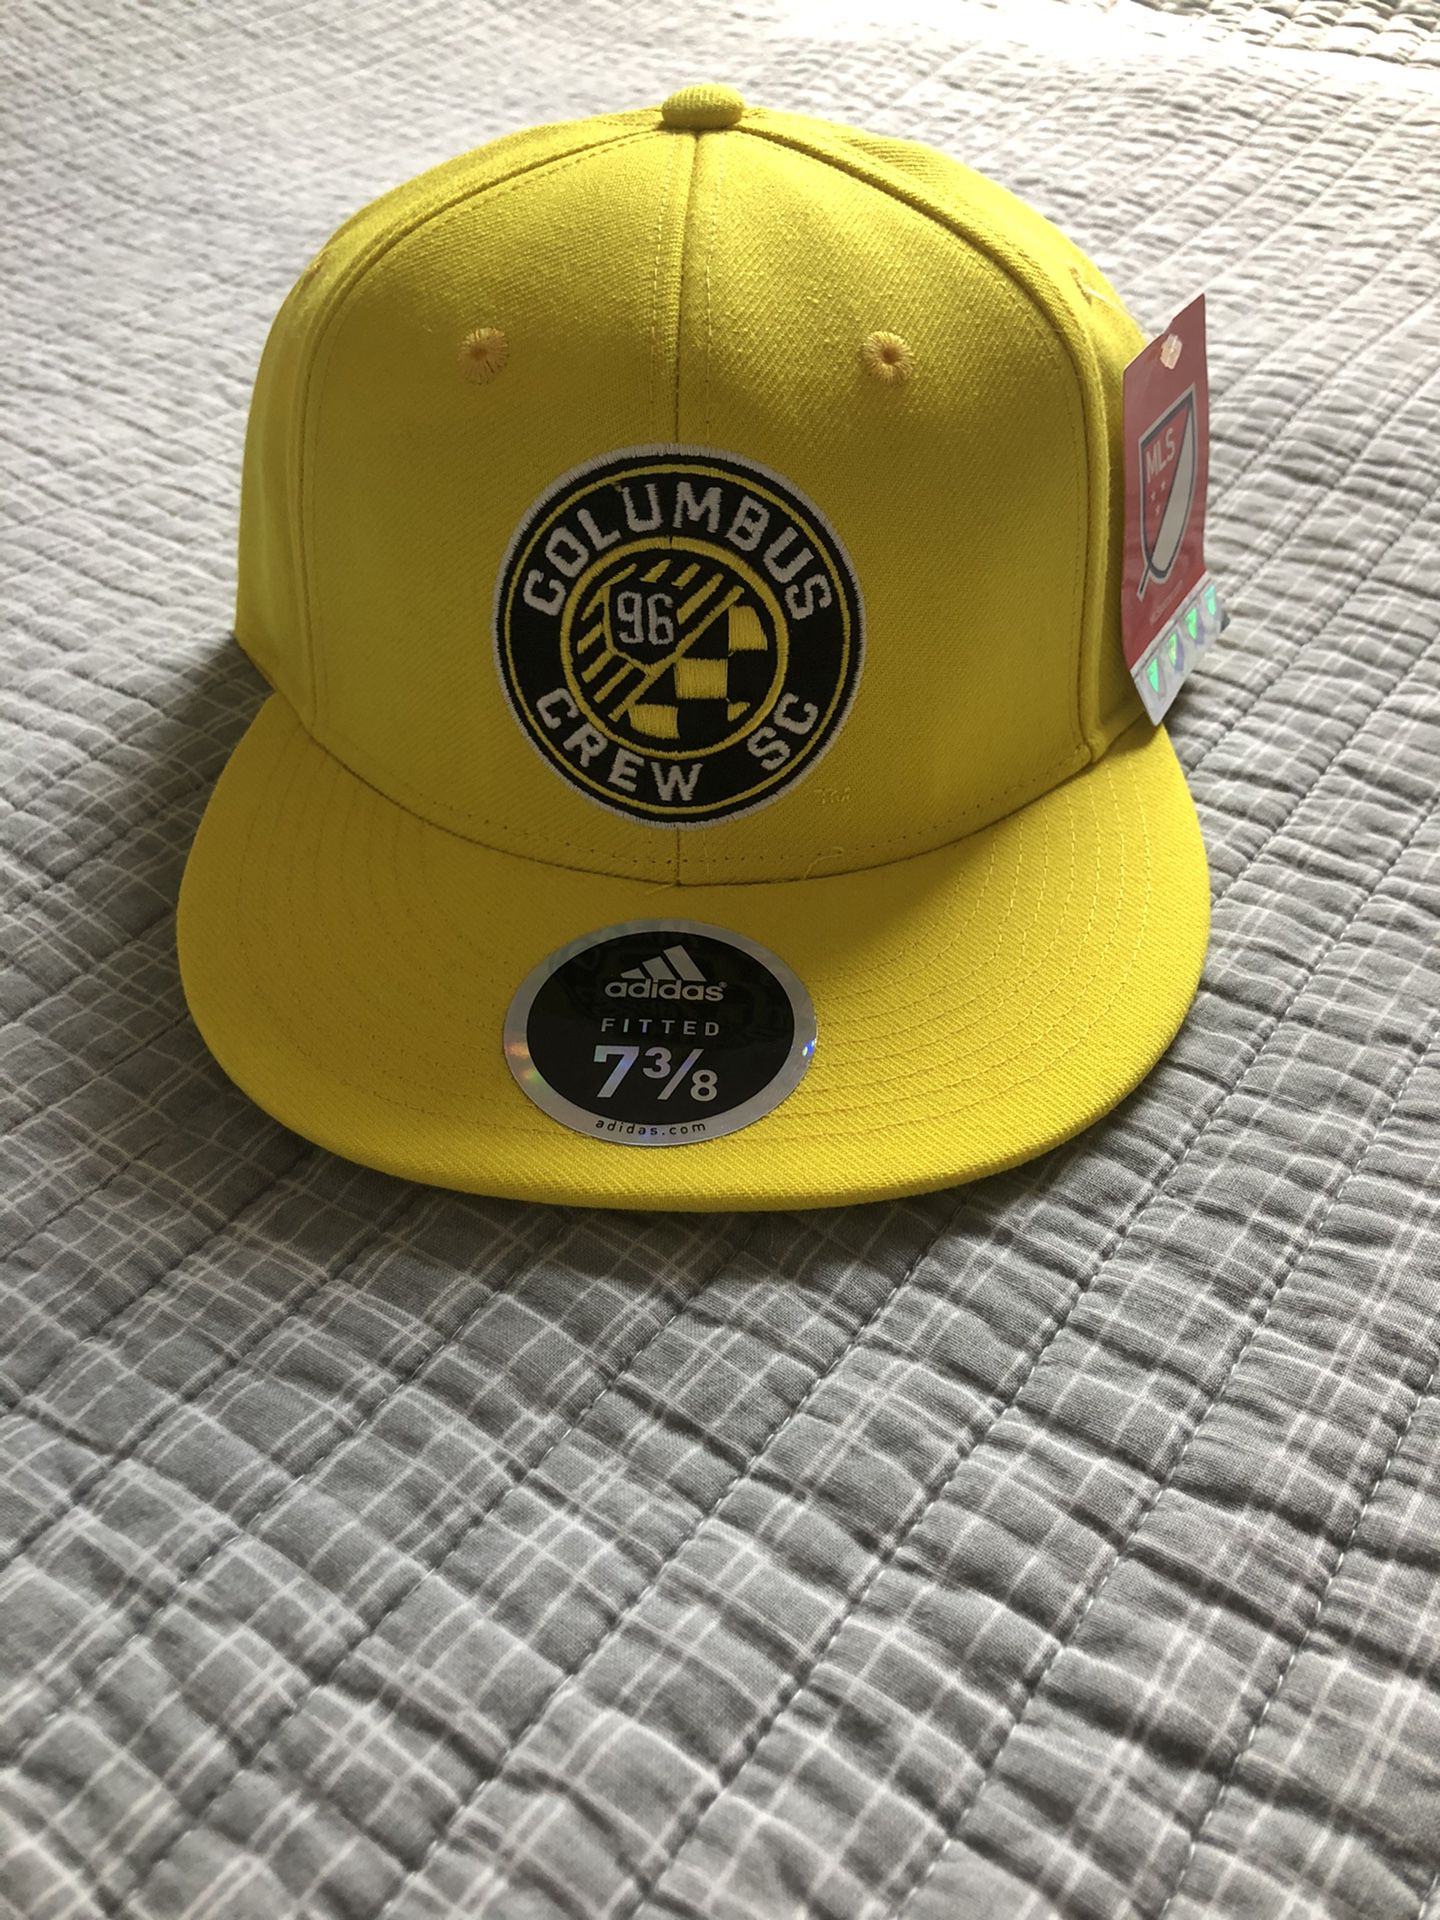 Columbus Crew MLS Adidas Yellow Fitted Hat Size 7 3/8